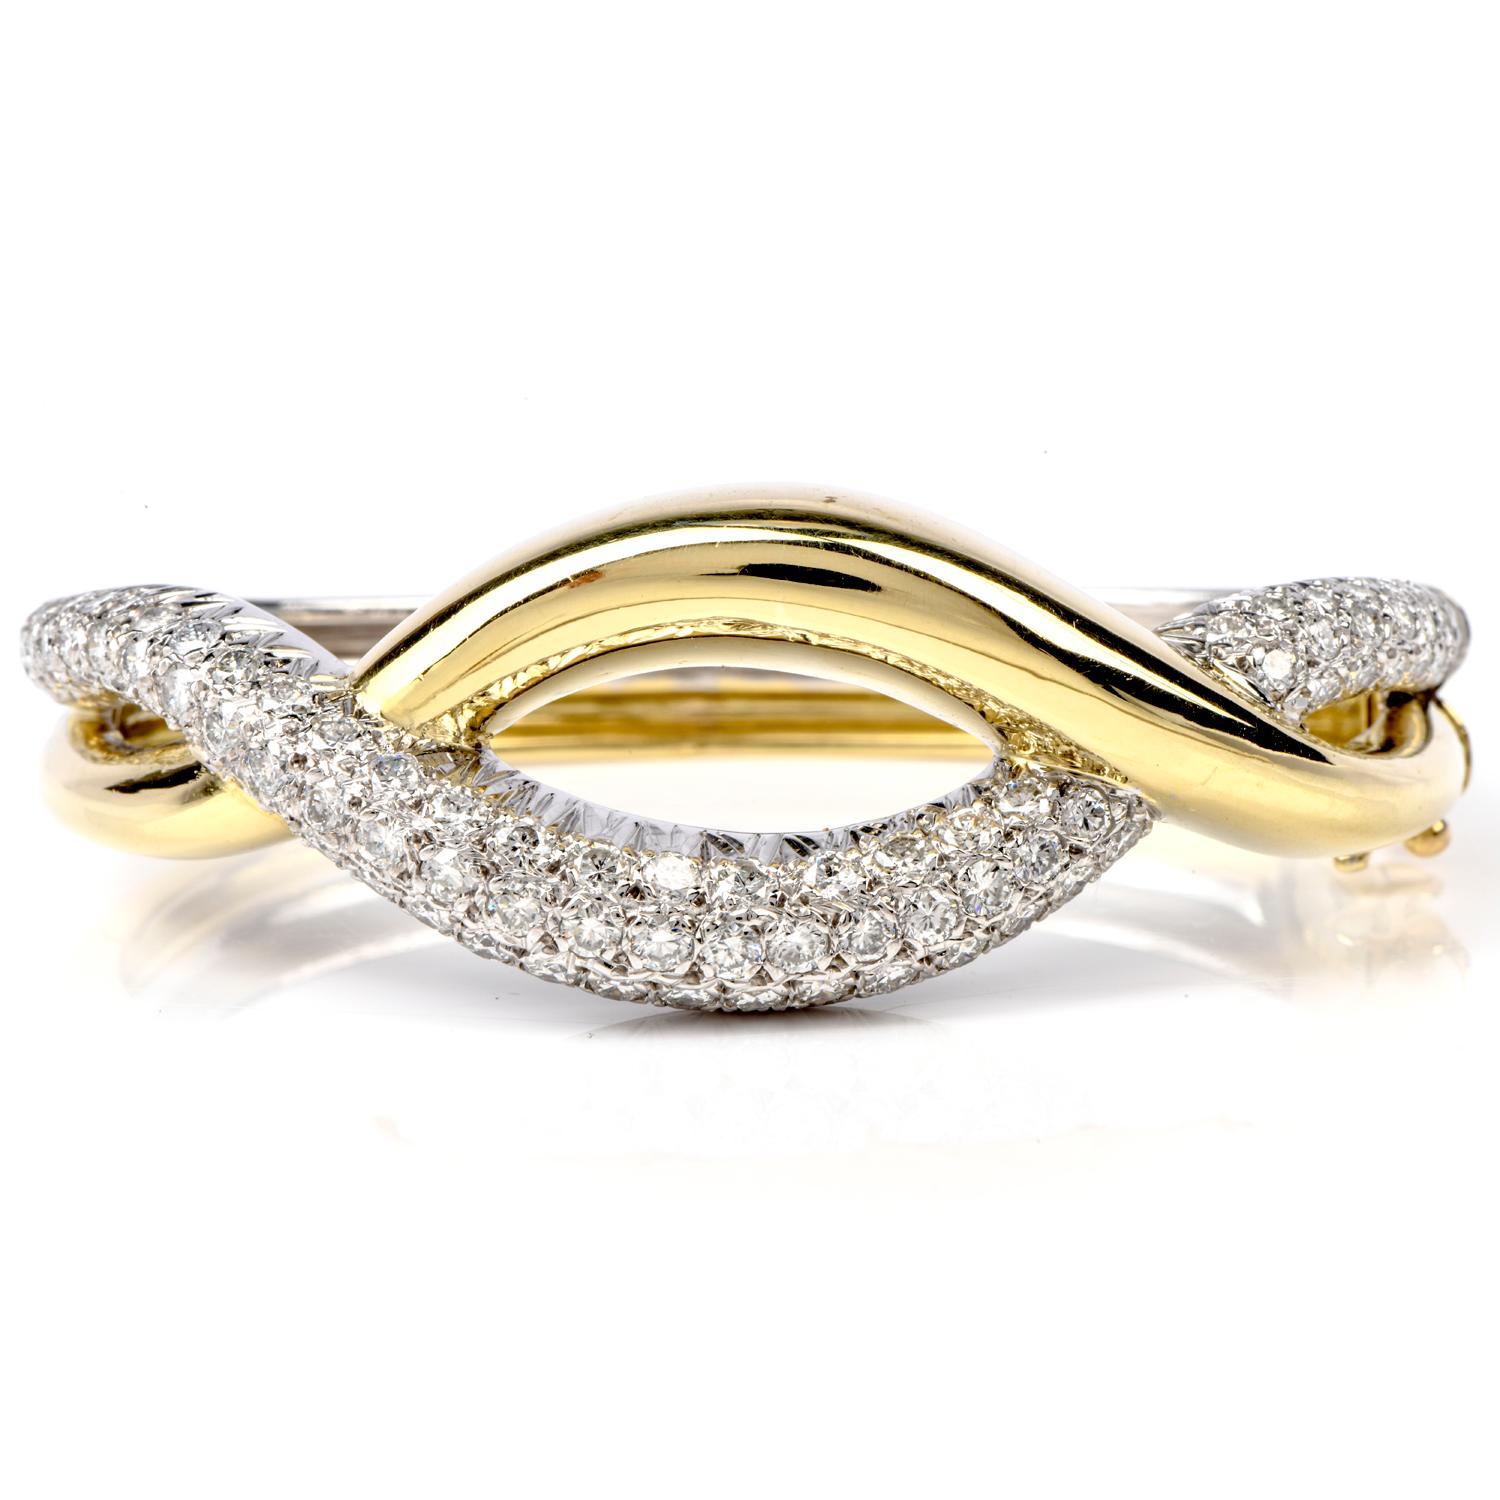 For the Fashionista!
Want to mix the colors of jewelry today with bright
Yellow and white? 
This free form 18K yellow gold and
White gold bracelet features an expansive swath of yellow
Gold swooping through the bracelet.  In an almost wrapping
And